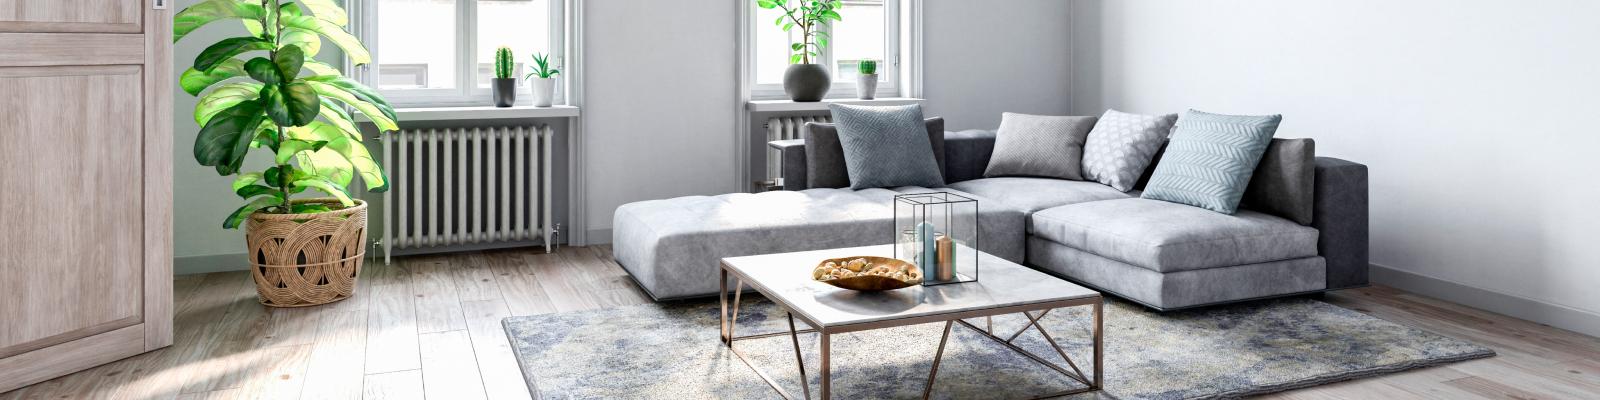 Modern living room with comfortable gray couch, glass coffee table, and green houseplant.